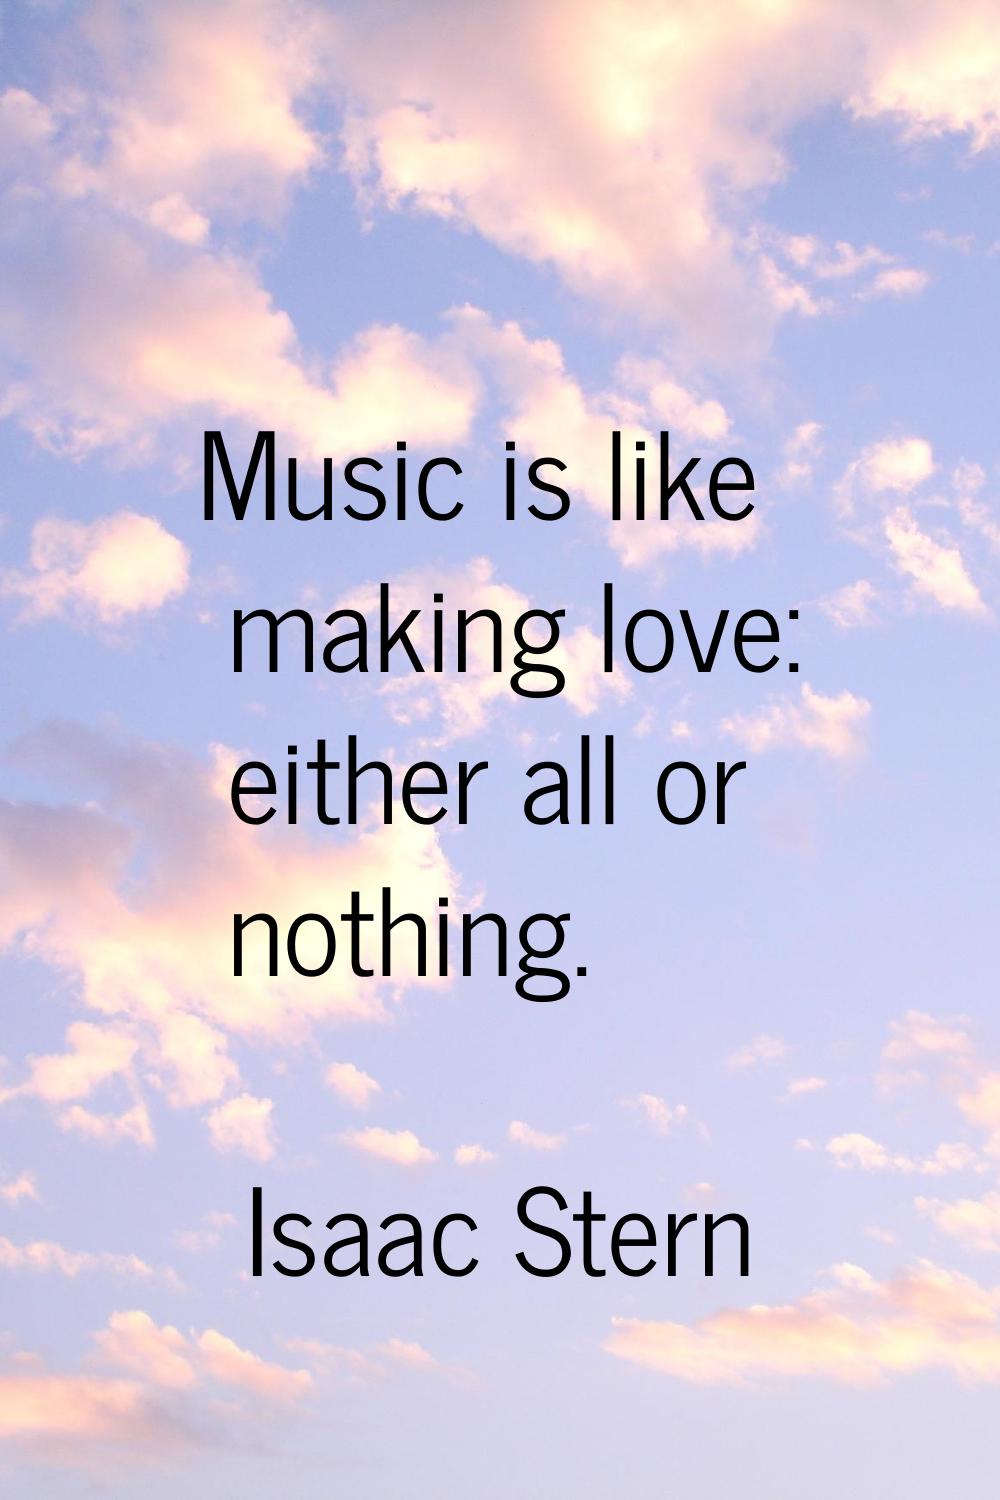 Music is like making love: either all or nothing.